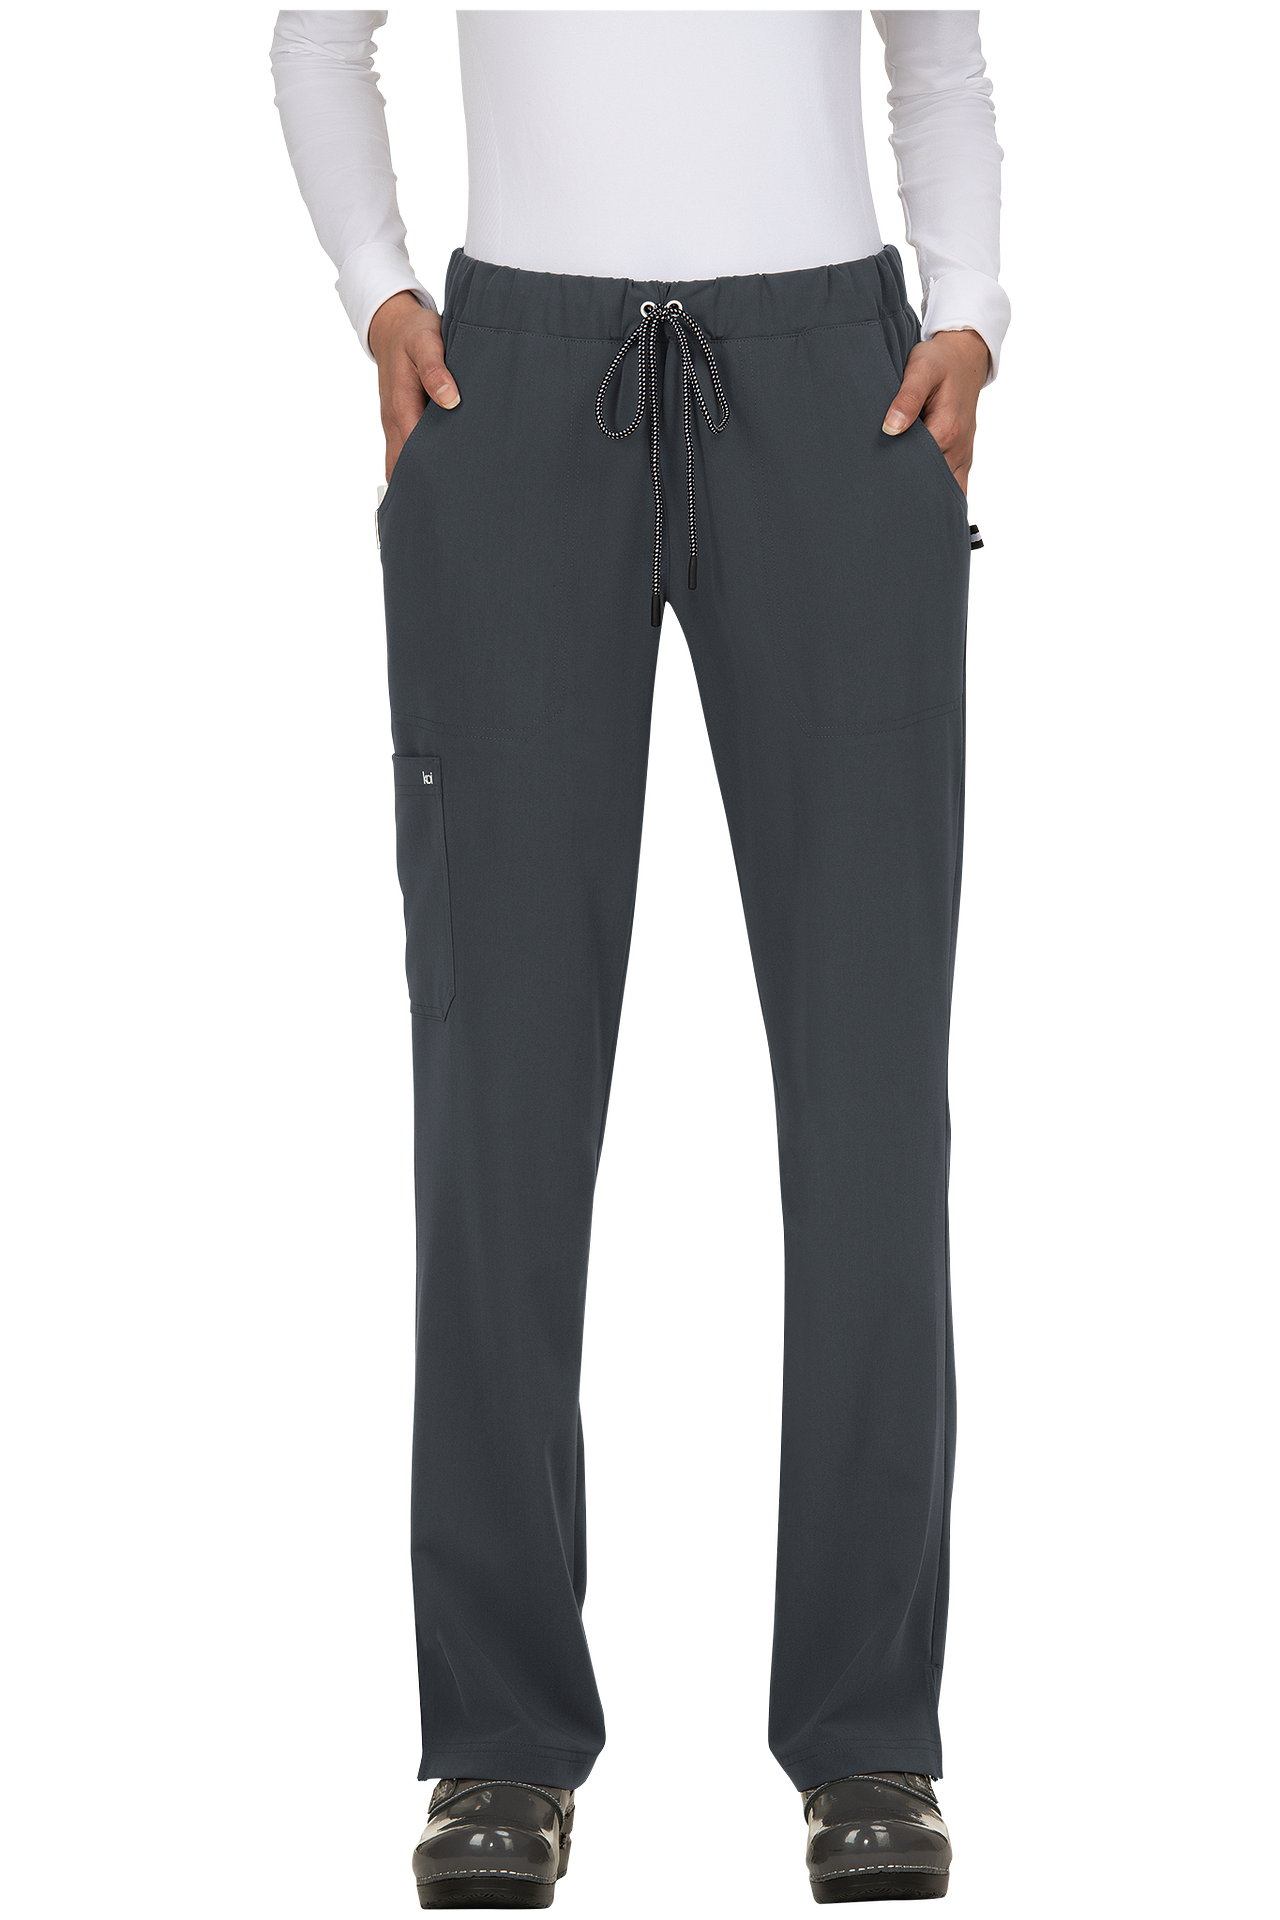 Koi Scrub Pant Next Gen Everyday Hero in Charcoal at Parker's Clothing and Shoes.